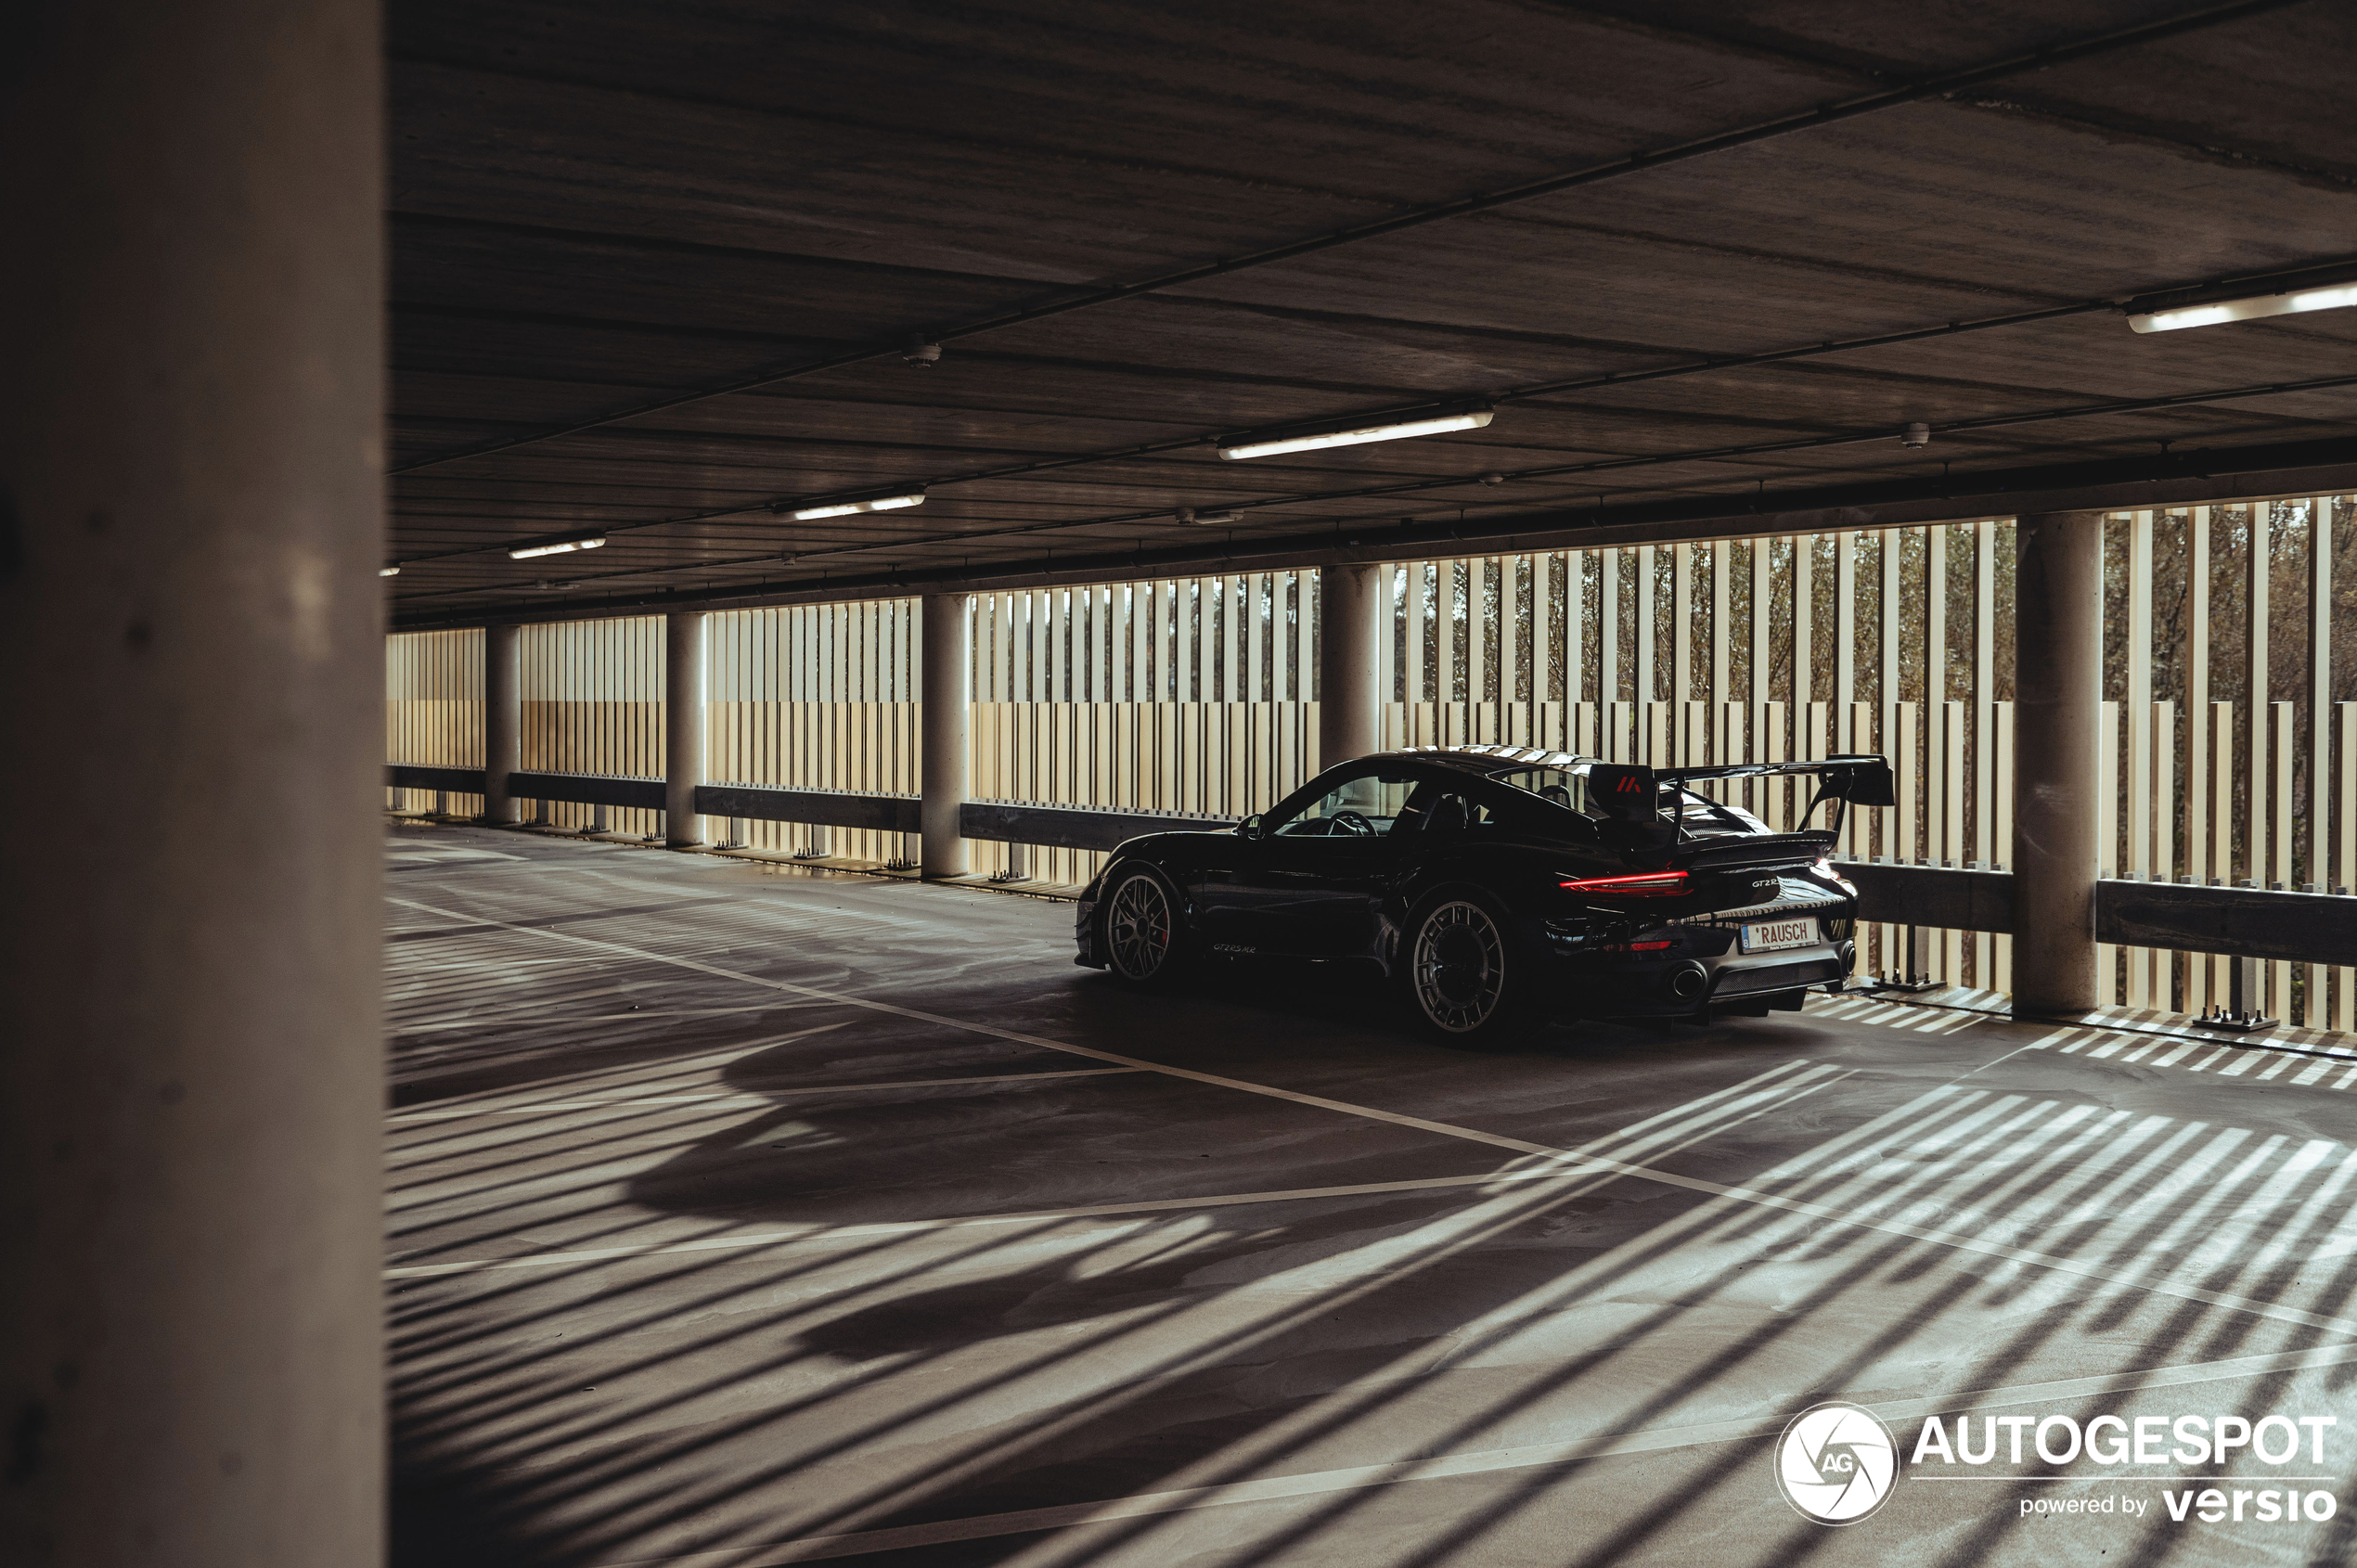 Breathtaking Shots of a Porsche Manthey Racing 991 GT2 RS MR